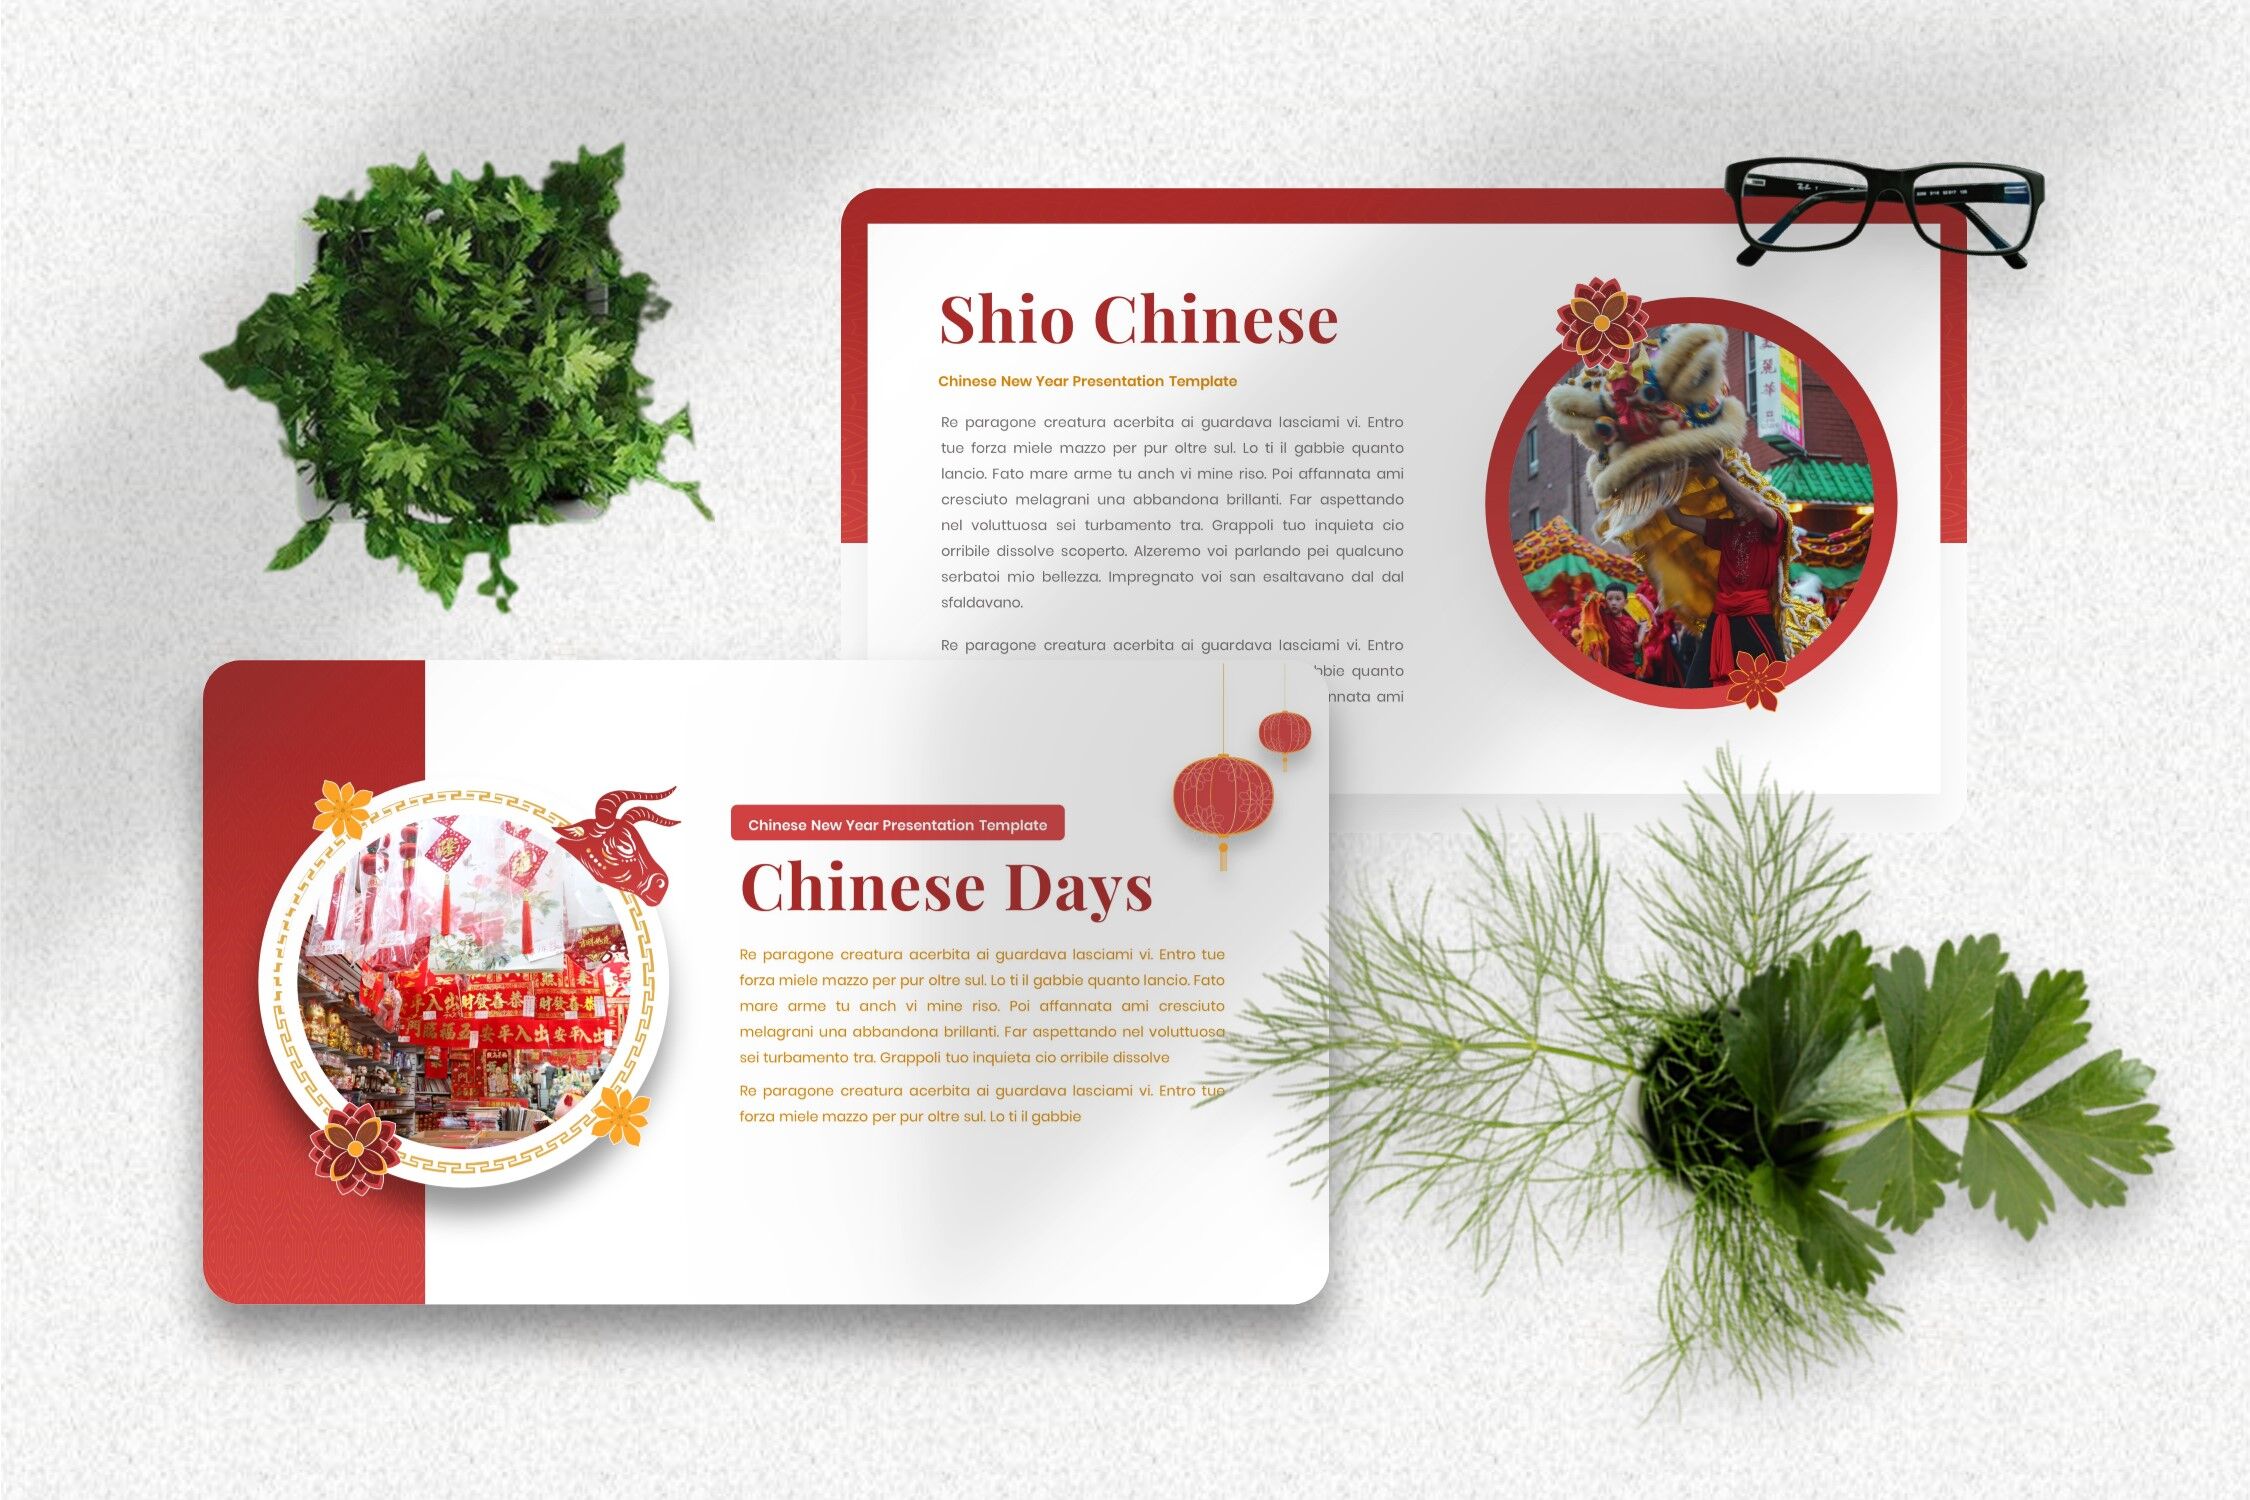 new year powerpoint templates